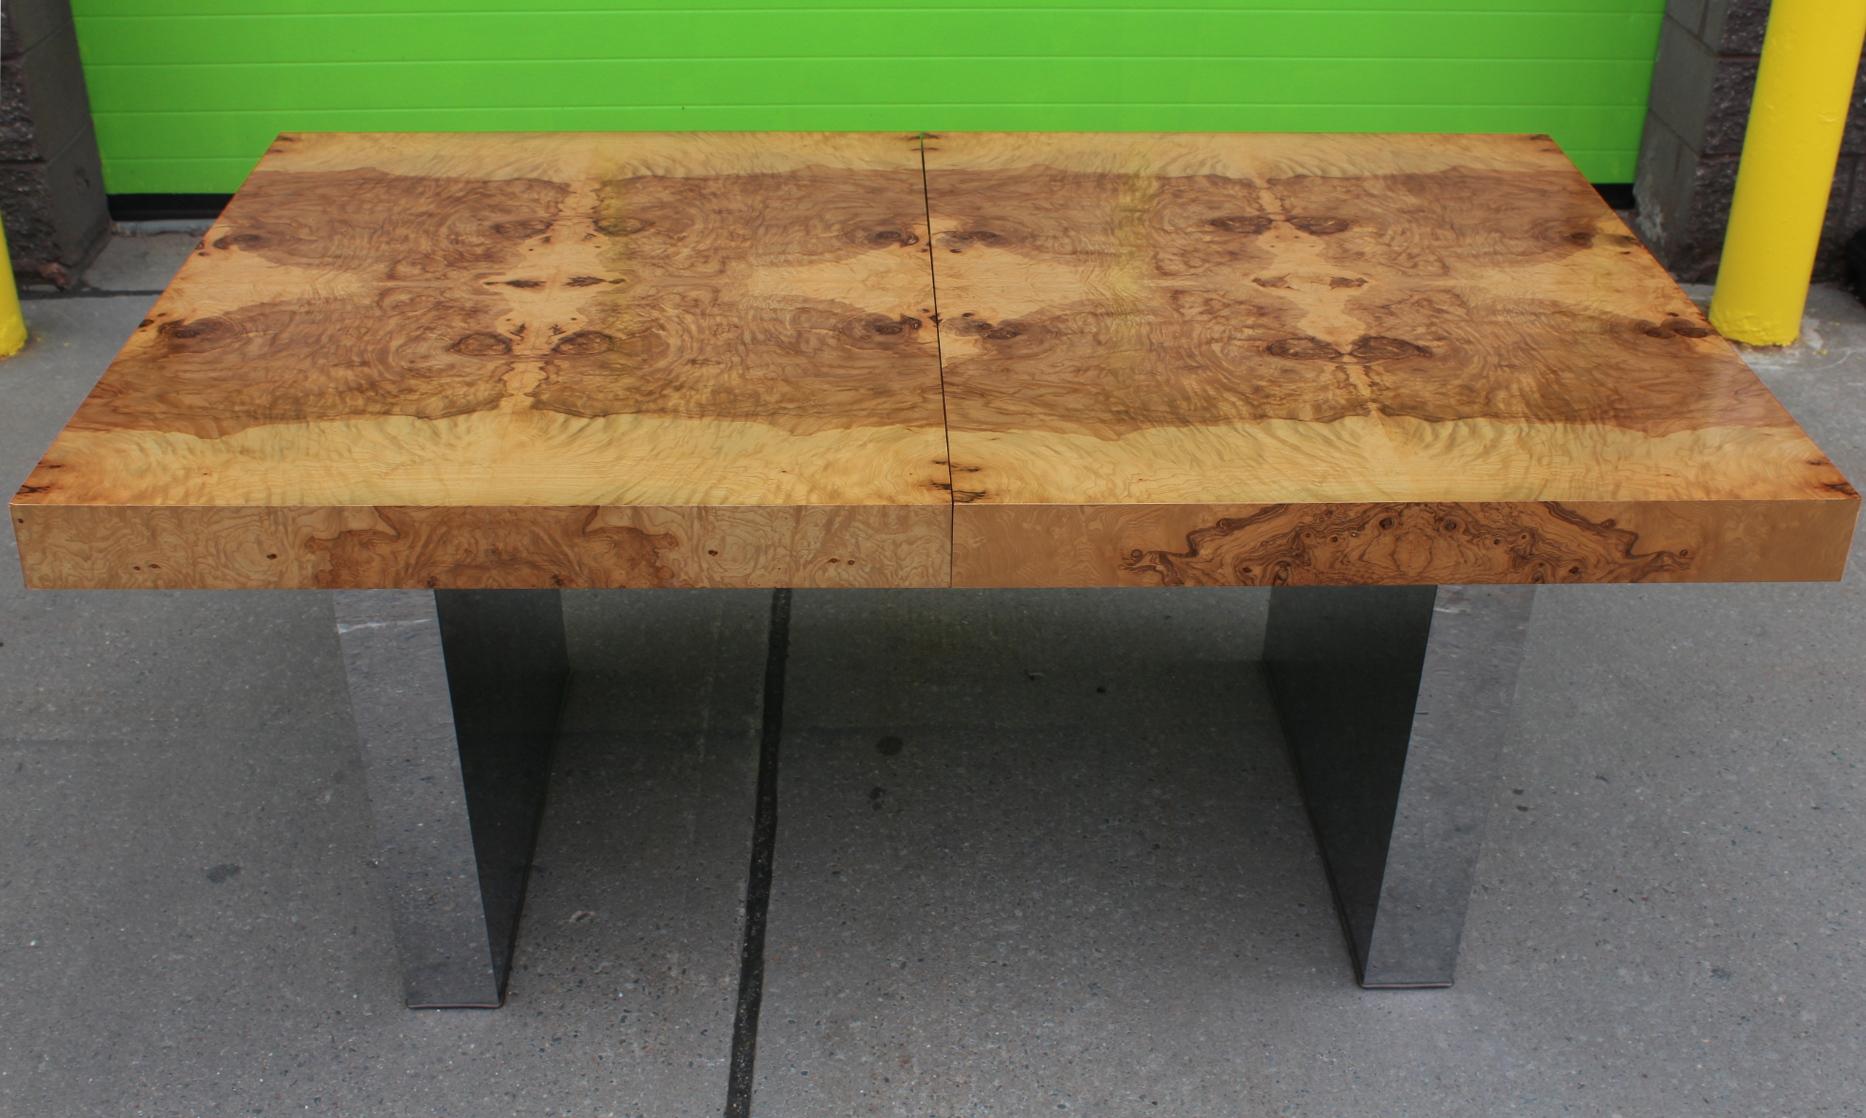 Milo Baughman extendable dining table from the mid-20th century with a burl wood top made out of several slabs oriented to form a pattern with the natural lines of the wood. The table stands on a pair of rectangular chrome legs. Comes with two